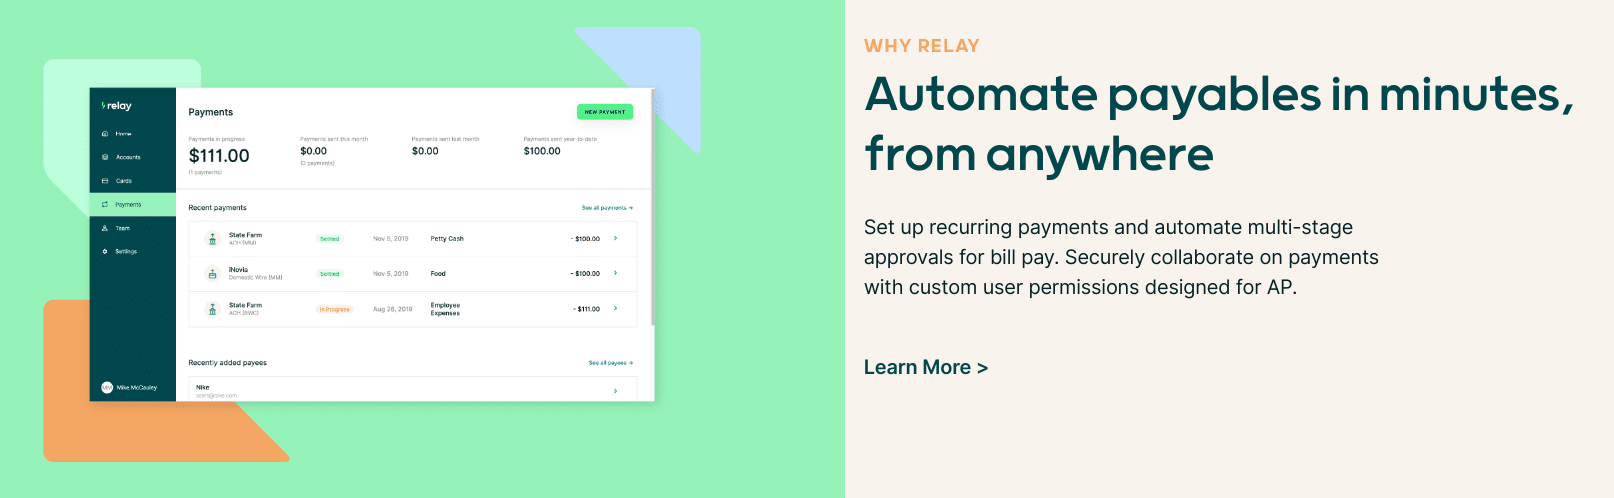 Relay Financial Automation